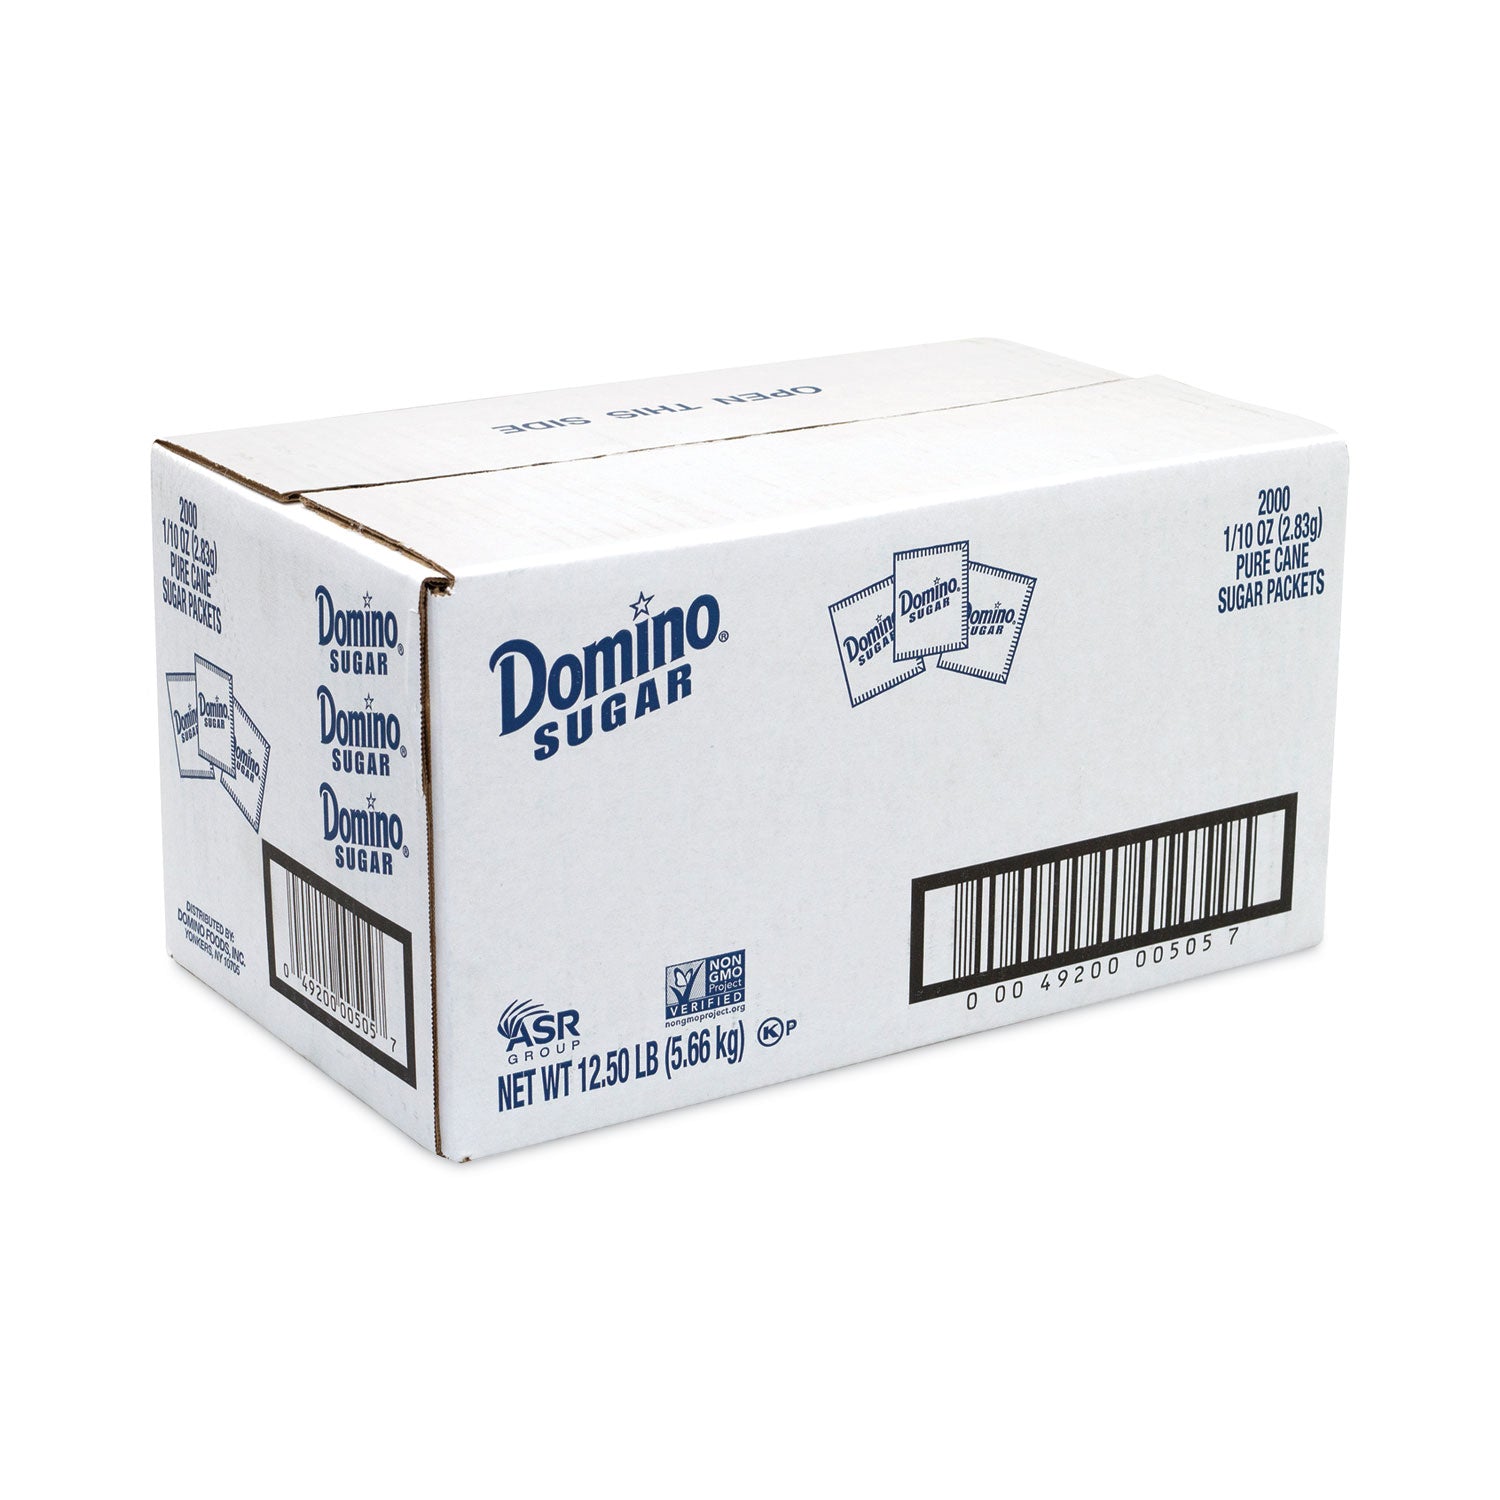 sugar-packets-01-oz-packet-2000-carton-ships-in-1-3-business-days_grr22000501 - 1